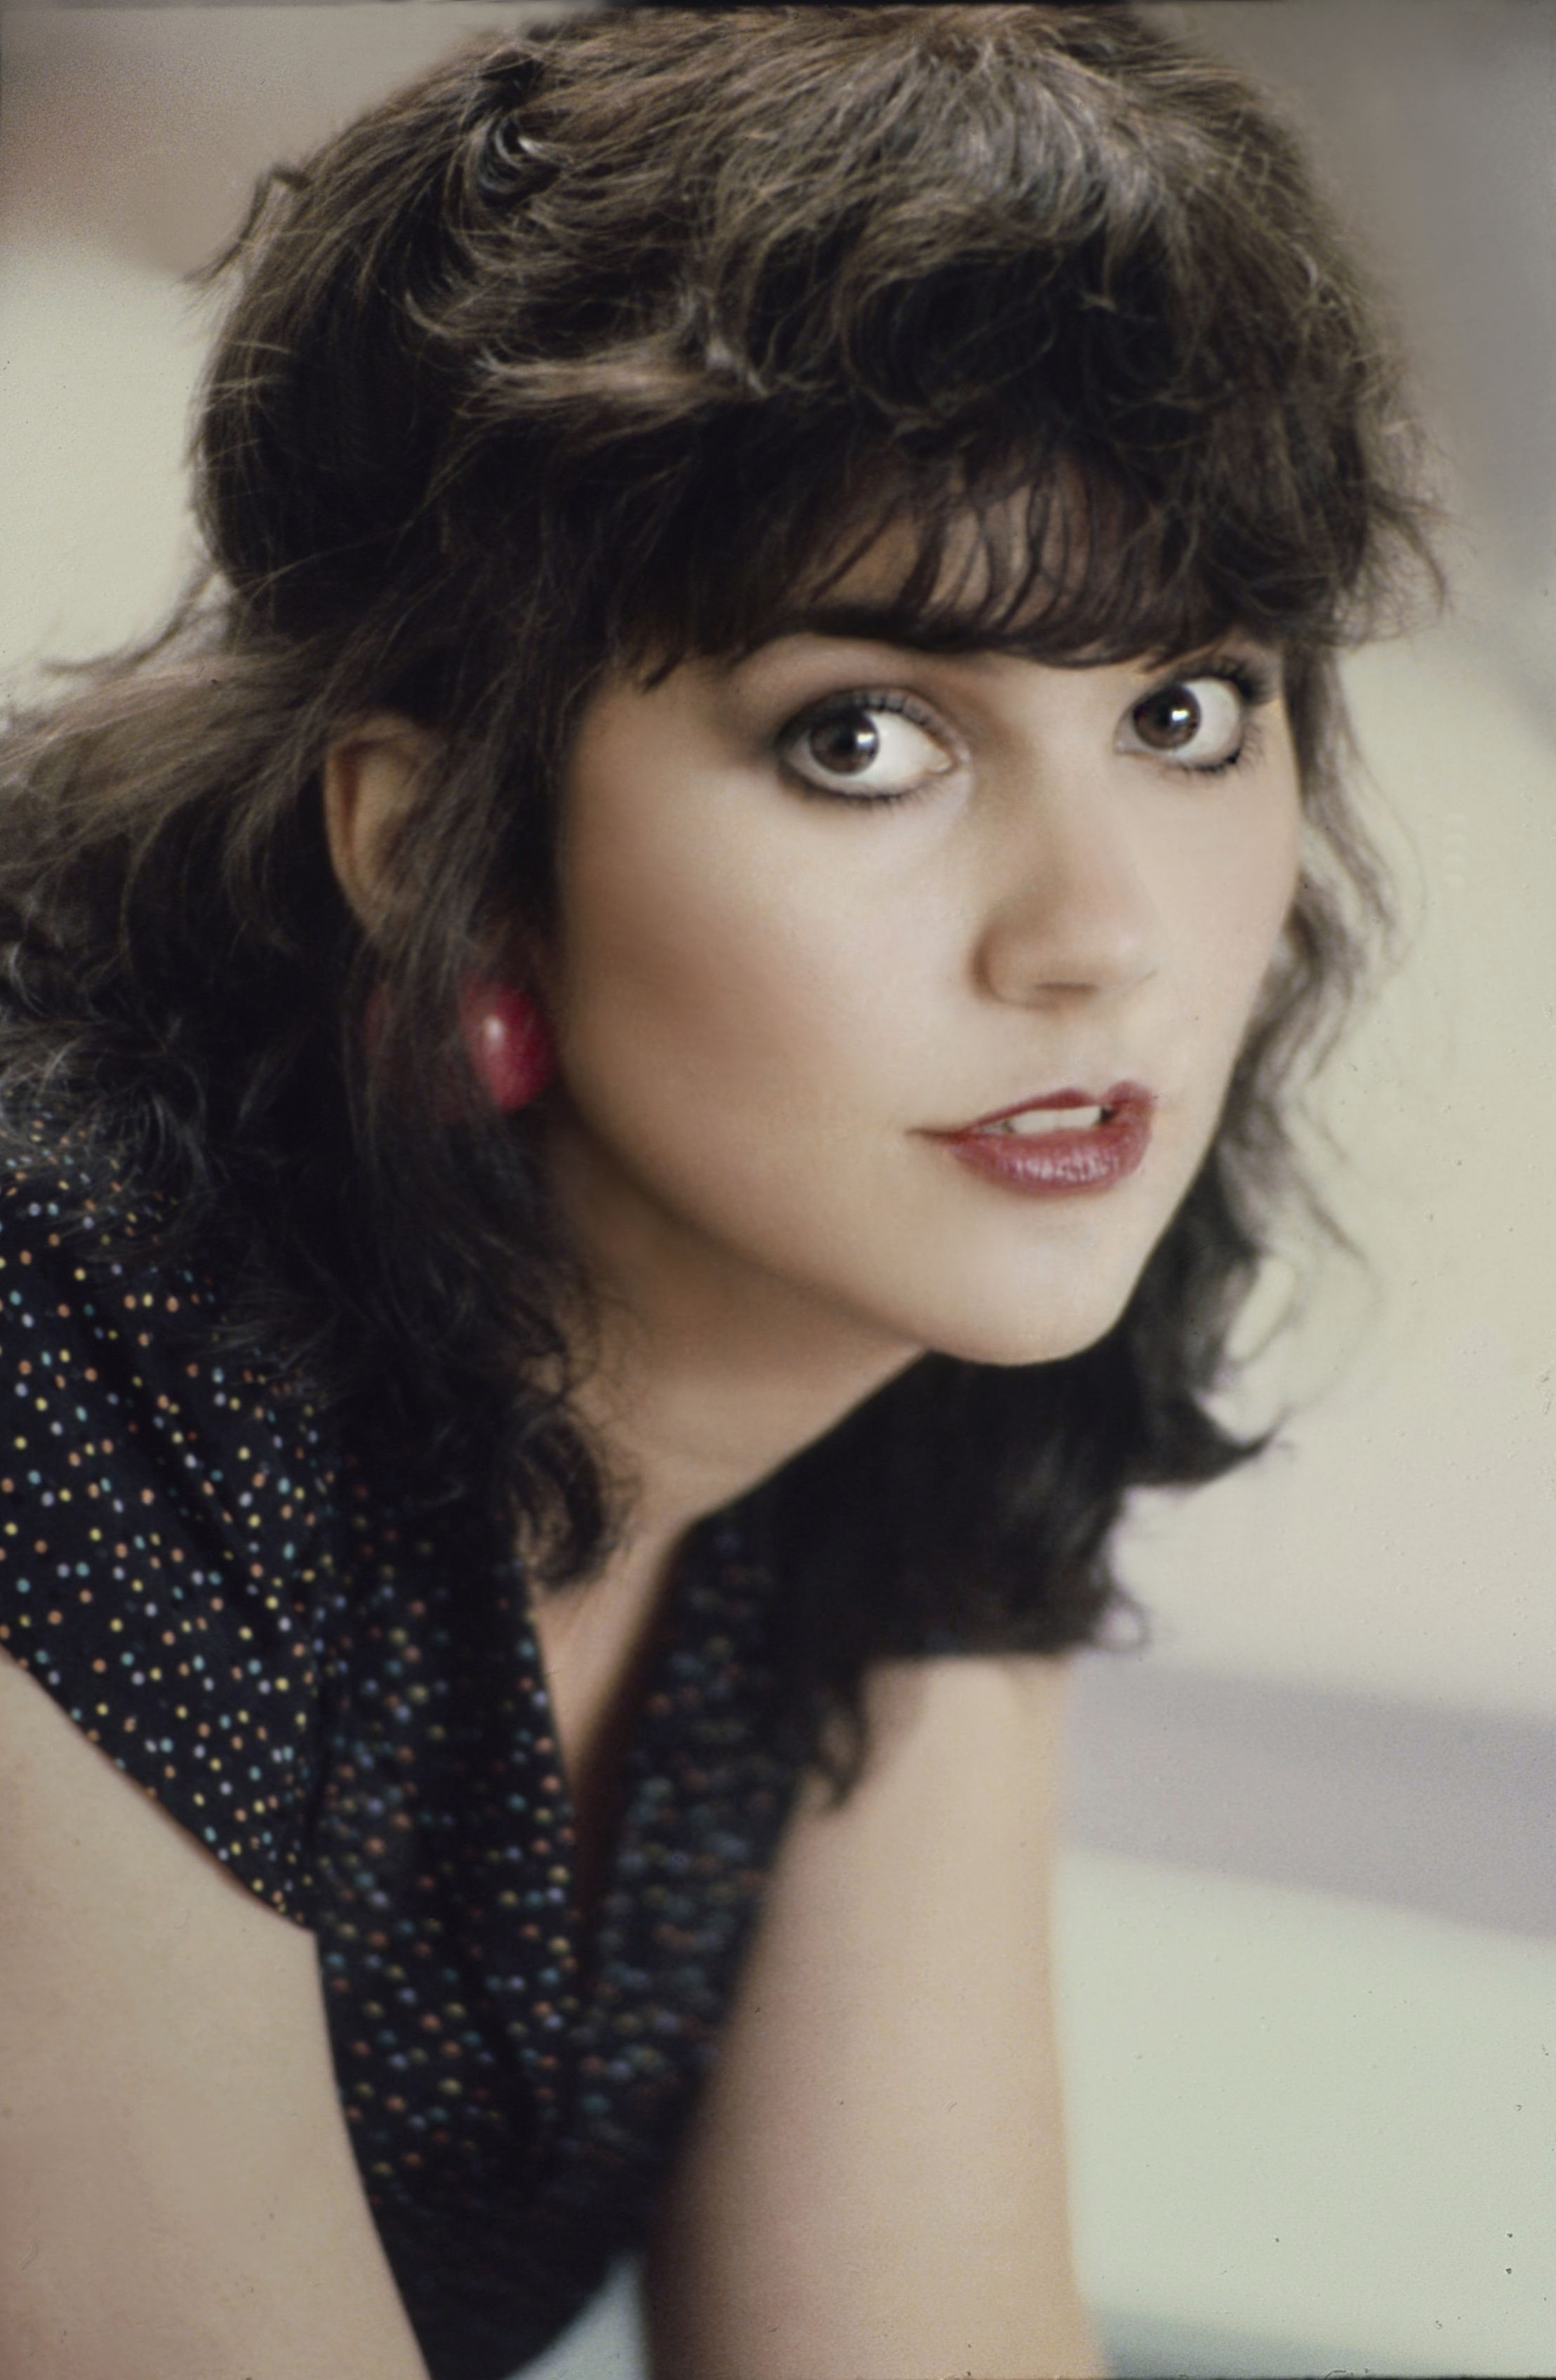 Singer and star Linda Ronstadt poses for a portrait in Los Angeles, California, circa 1982 | Source: Getty Images